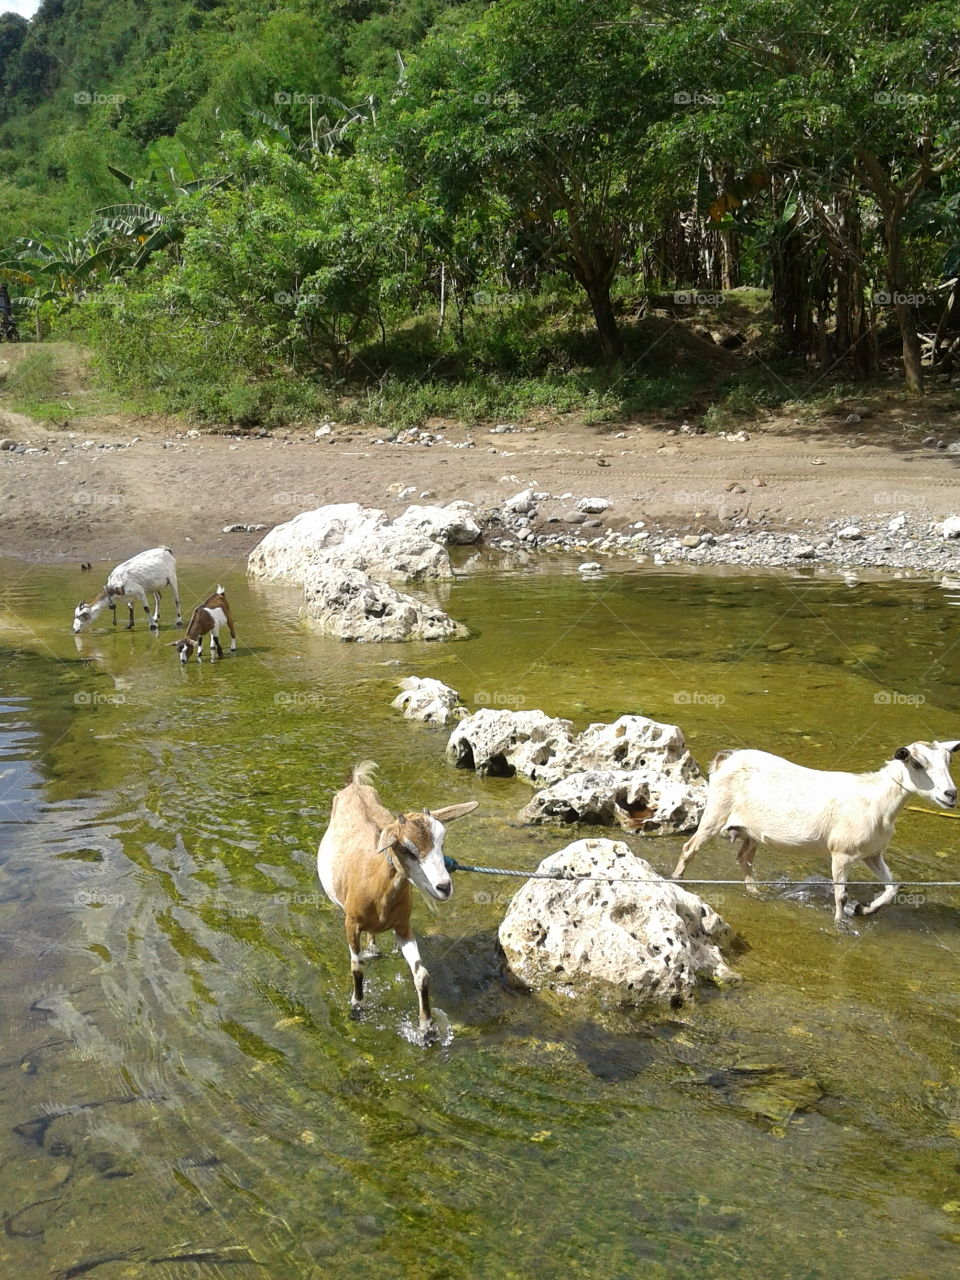 Goats in the river
drinking water